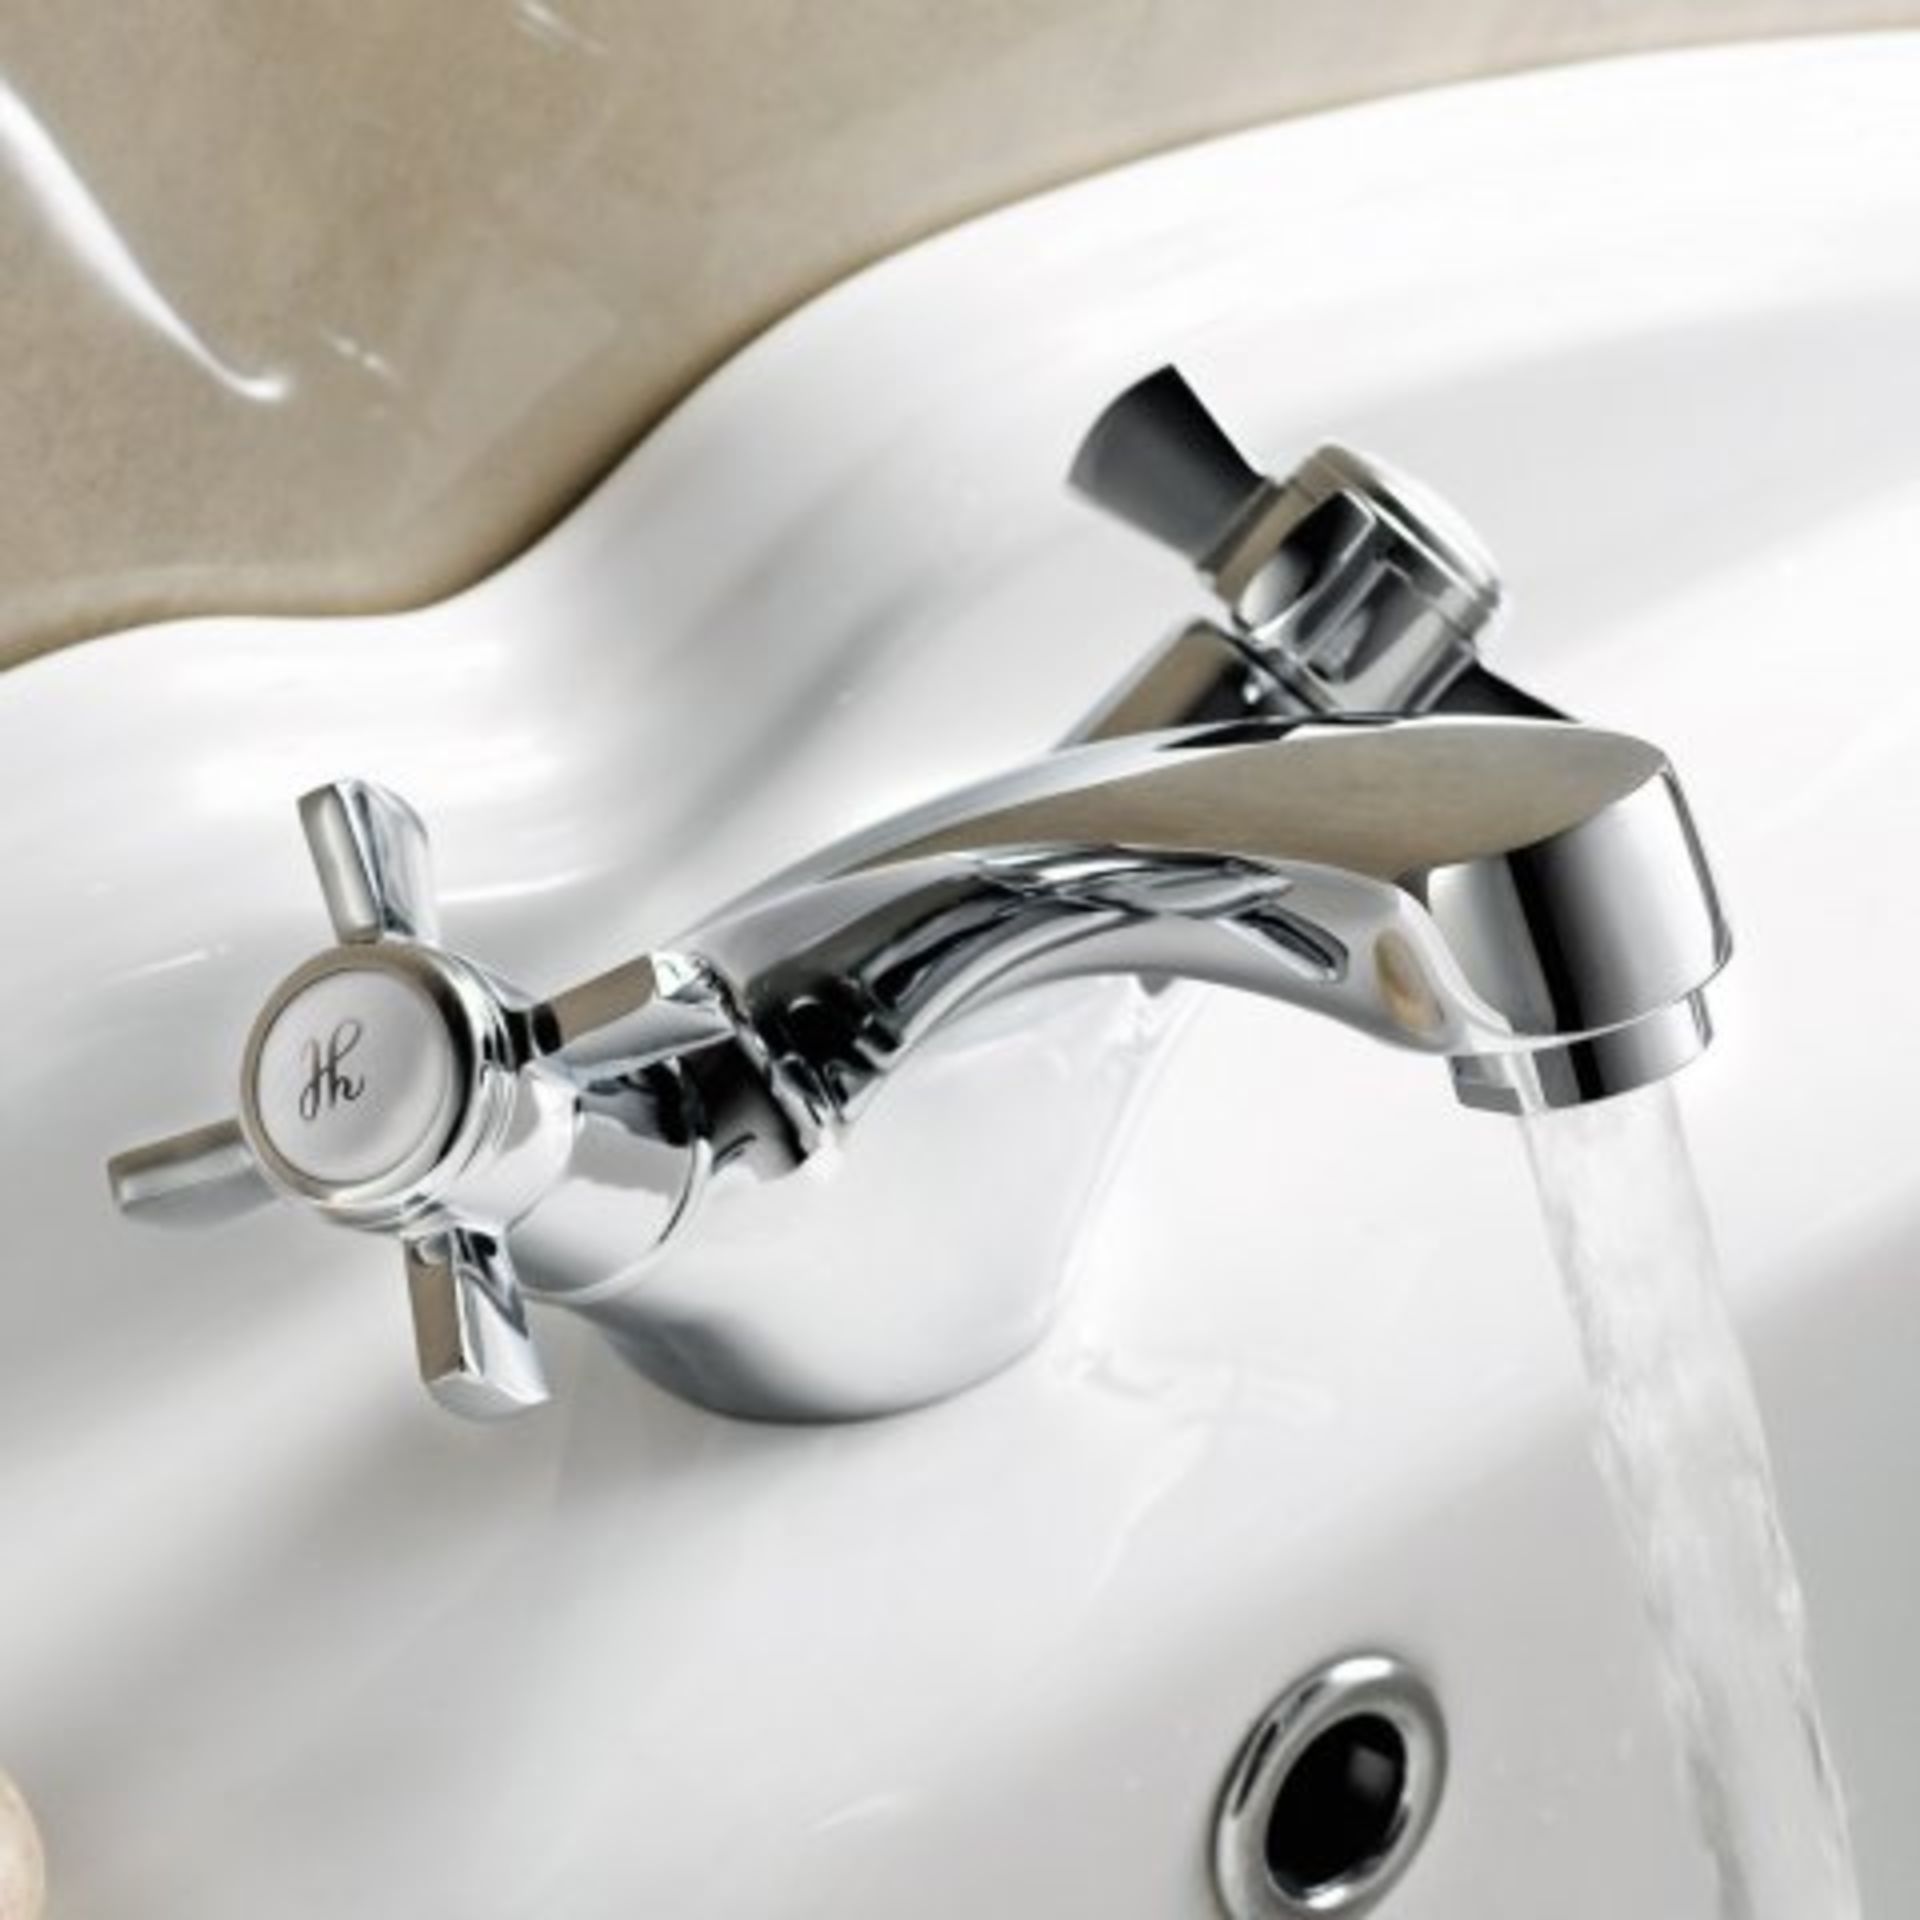 (H38) Cambridge Traditional Basin Mixer Tap Our great range of traditional taps are perfect for